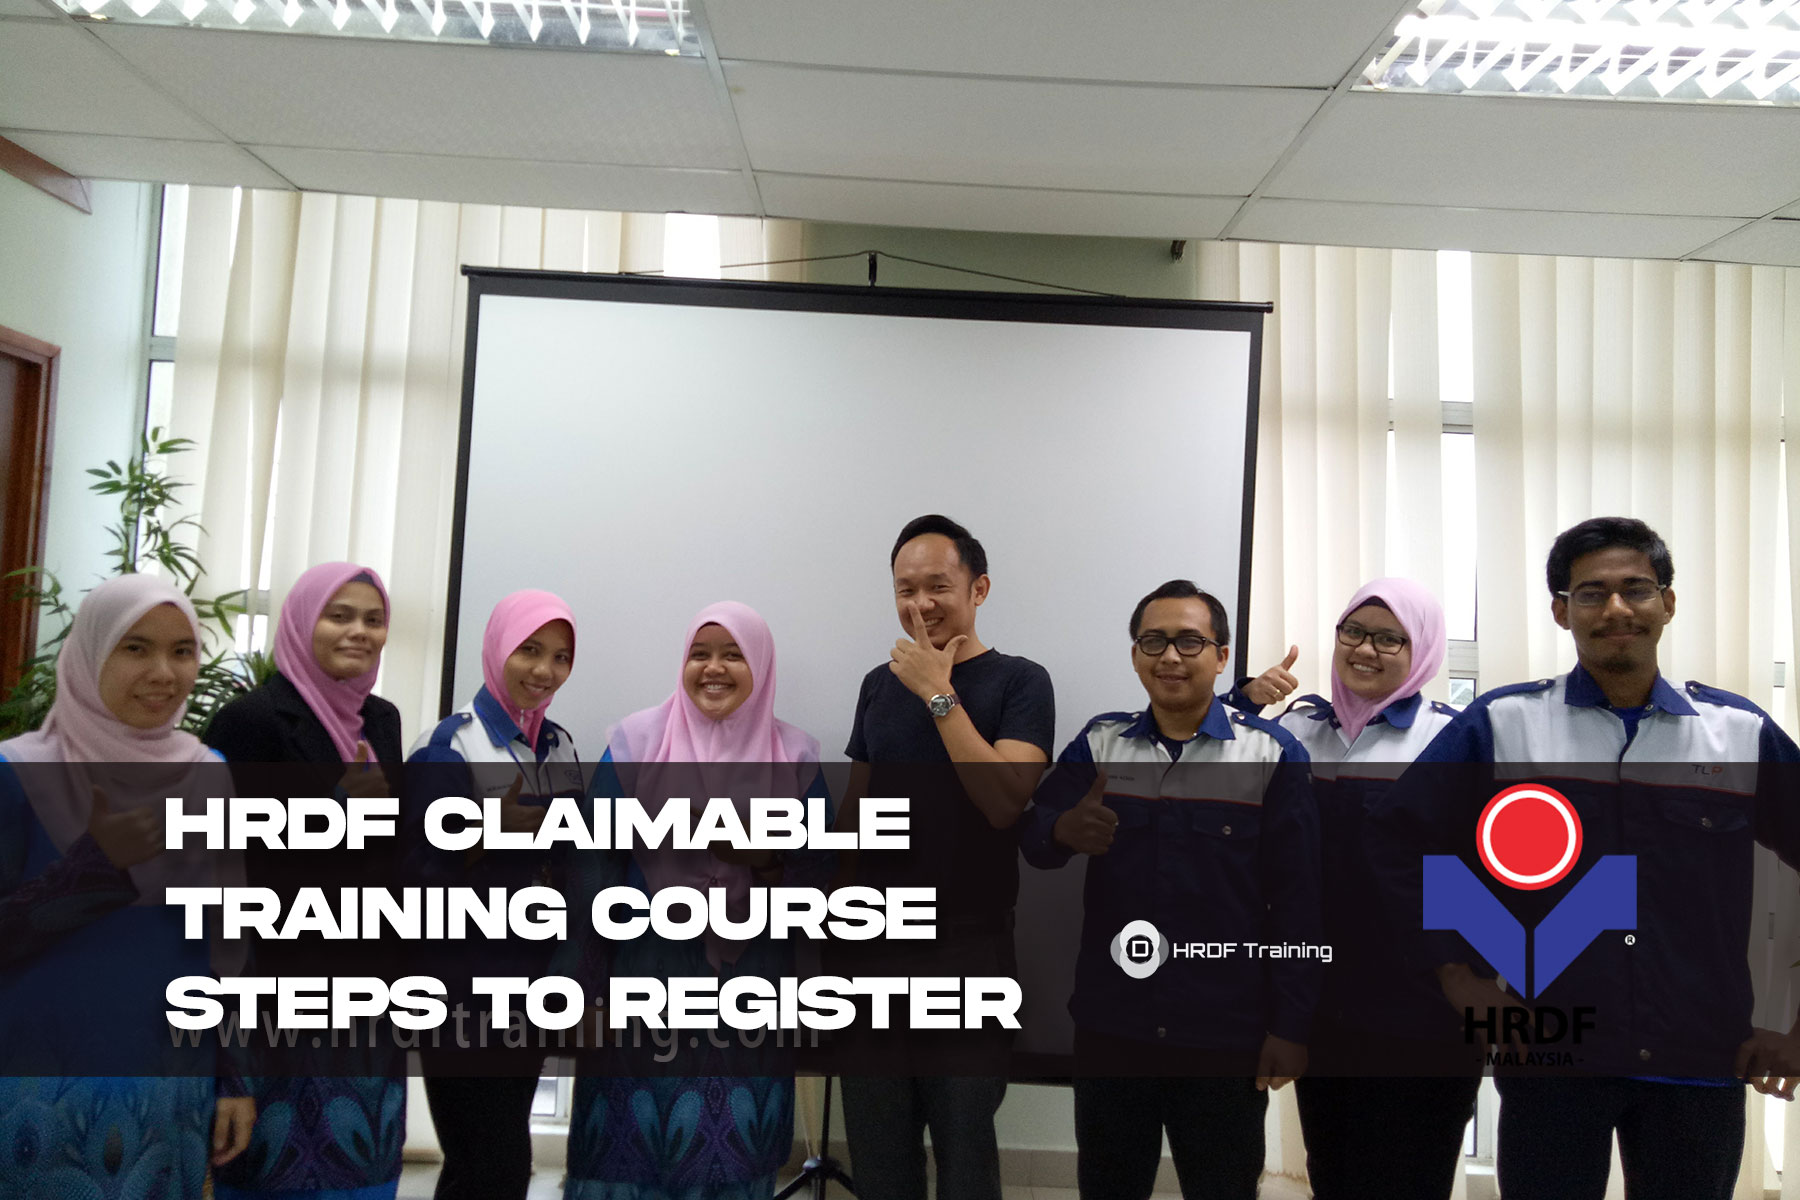 HRDF Claimable Training Course steps to register